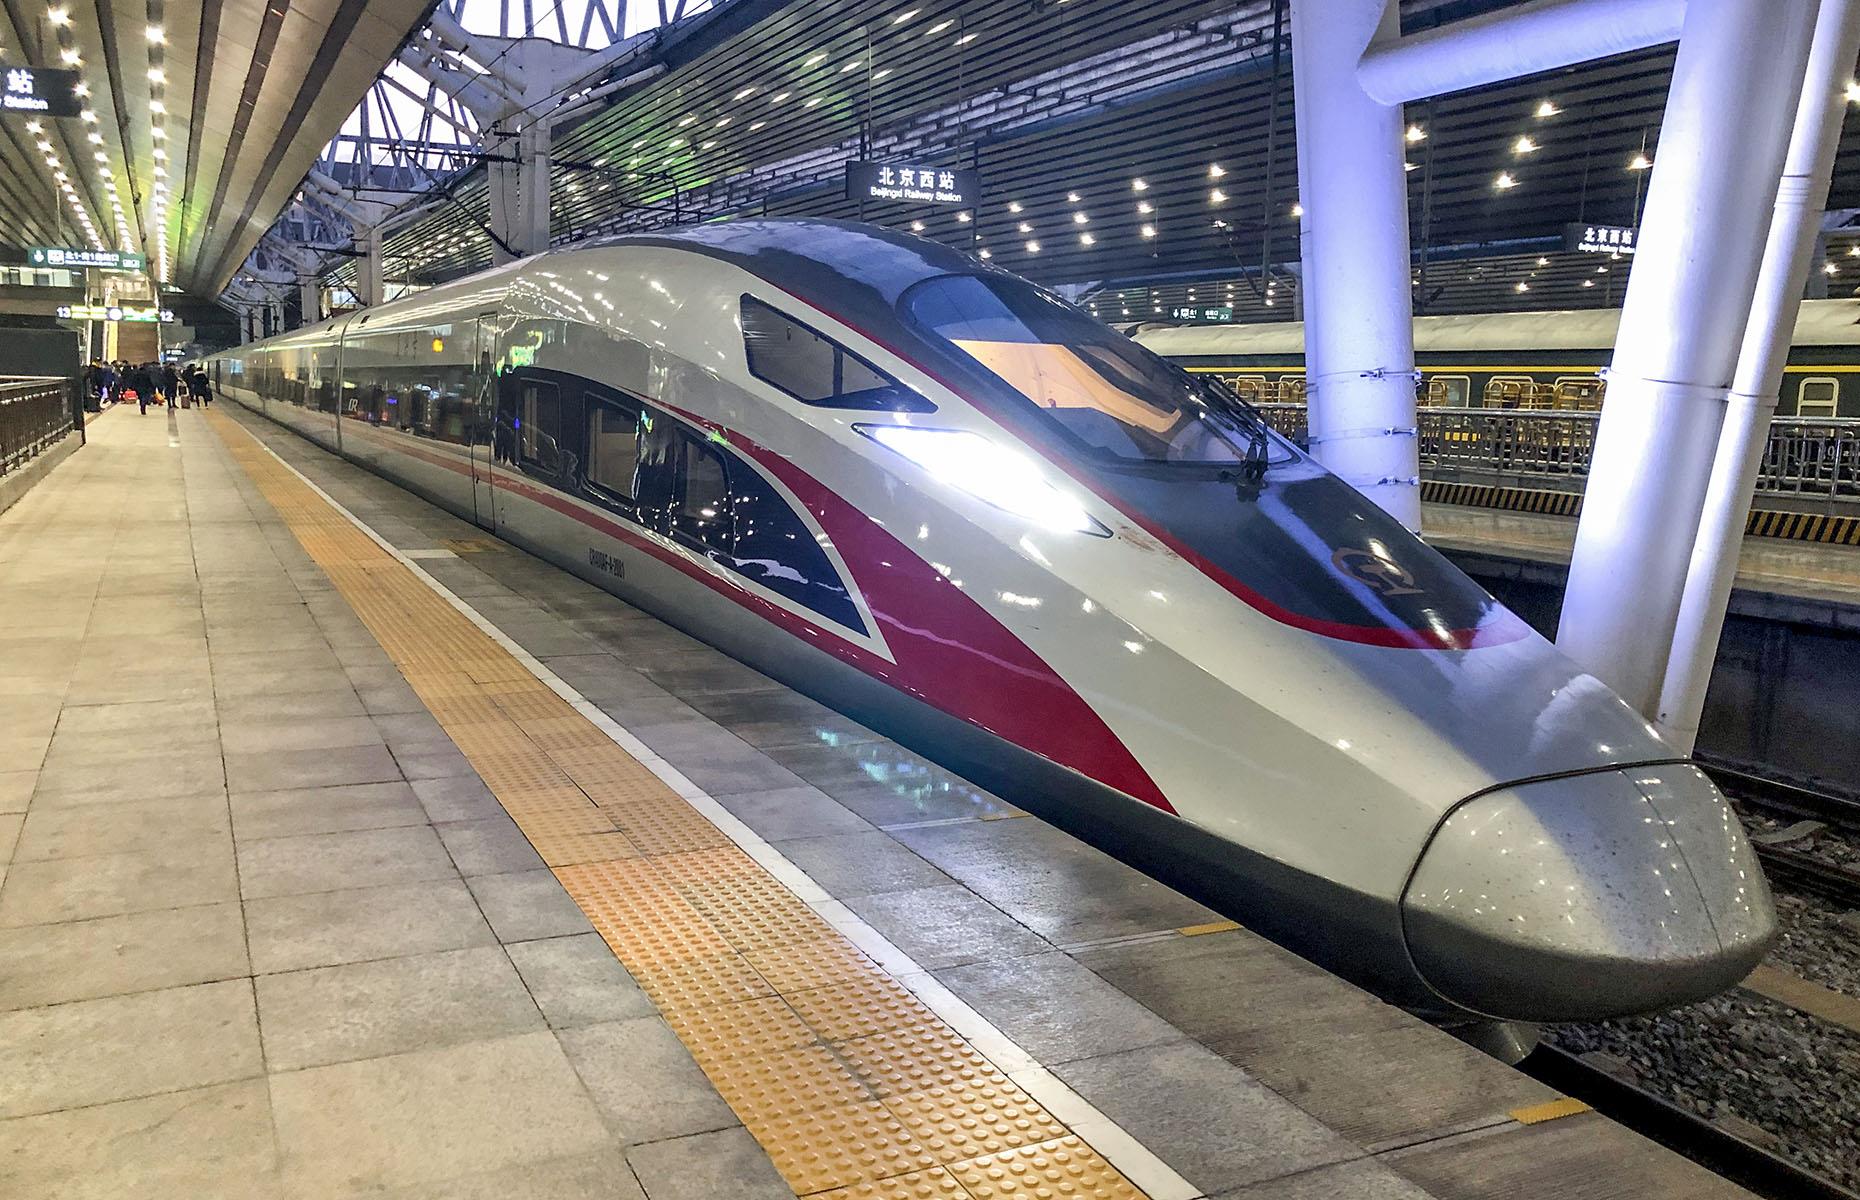 <p>In 2011, China overtook Japan as the country with the highest number of high-speed rail (HSR) passengers – a remarkable feat for a country that didn't have any high-speed rail lines at the start of the century. At its peak in 2019, 2.29 billion people rode China's HSR rails. Today, China boasts 26,000 miles (42,000km) of high-speed tracks, which is longer than the circumference of the Earth. This aerodynamic G20 train, pictured, travels along the Beijing to Hong Kong line, which opened in 2018. Its sleek body and elongated nose show just how much trains have developed over the decades.</p>